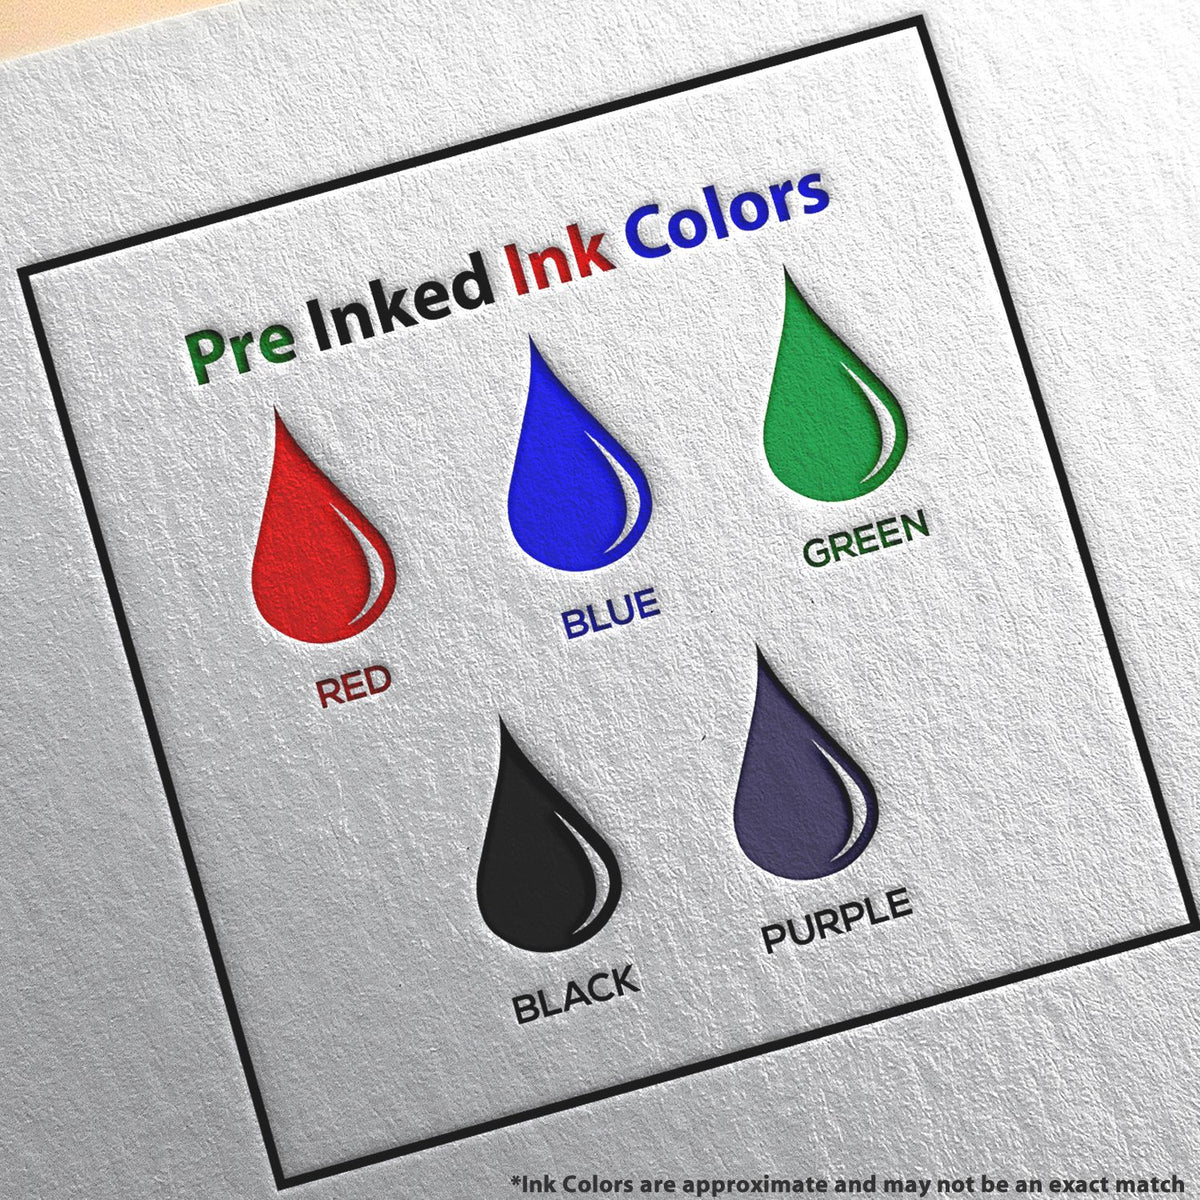 A picture showing the different ink colors or hues available for the MaxLight Premium Pre-Inked Iowa State Seal Notarial Stamp product.